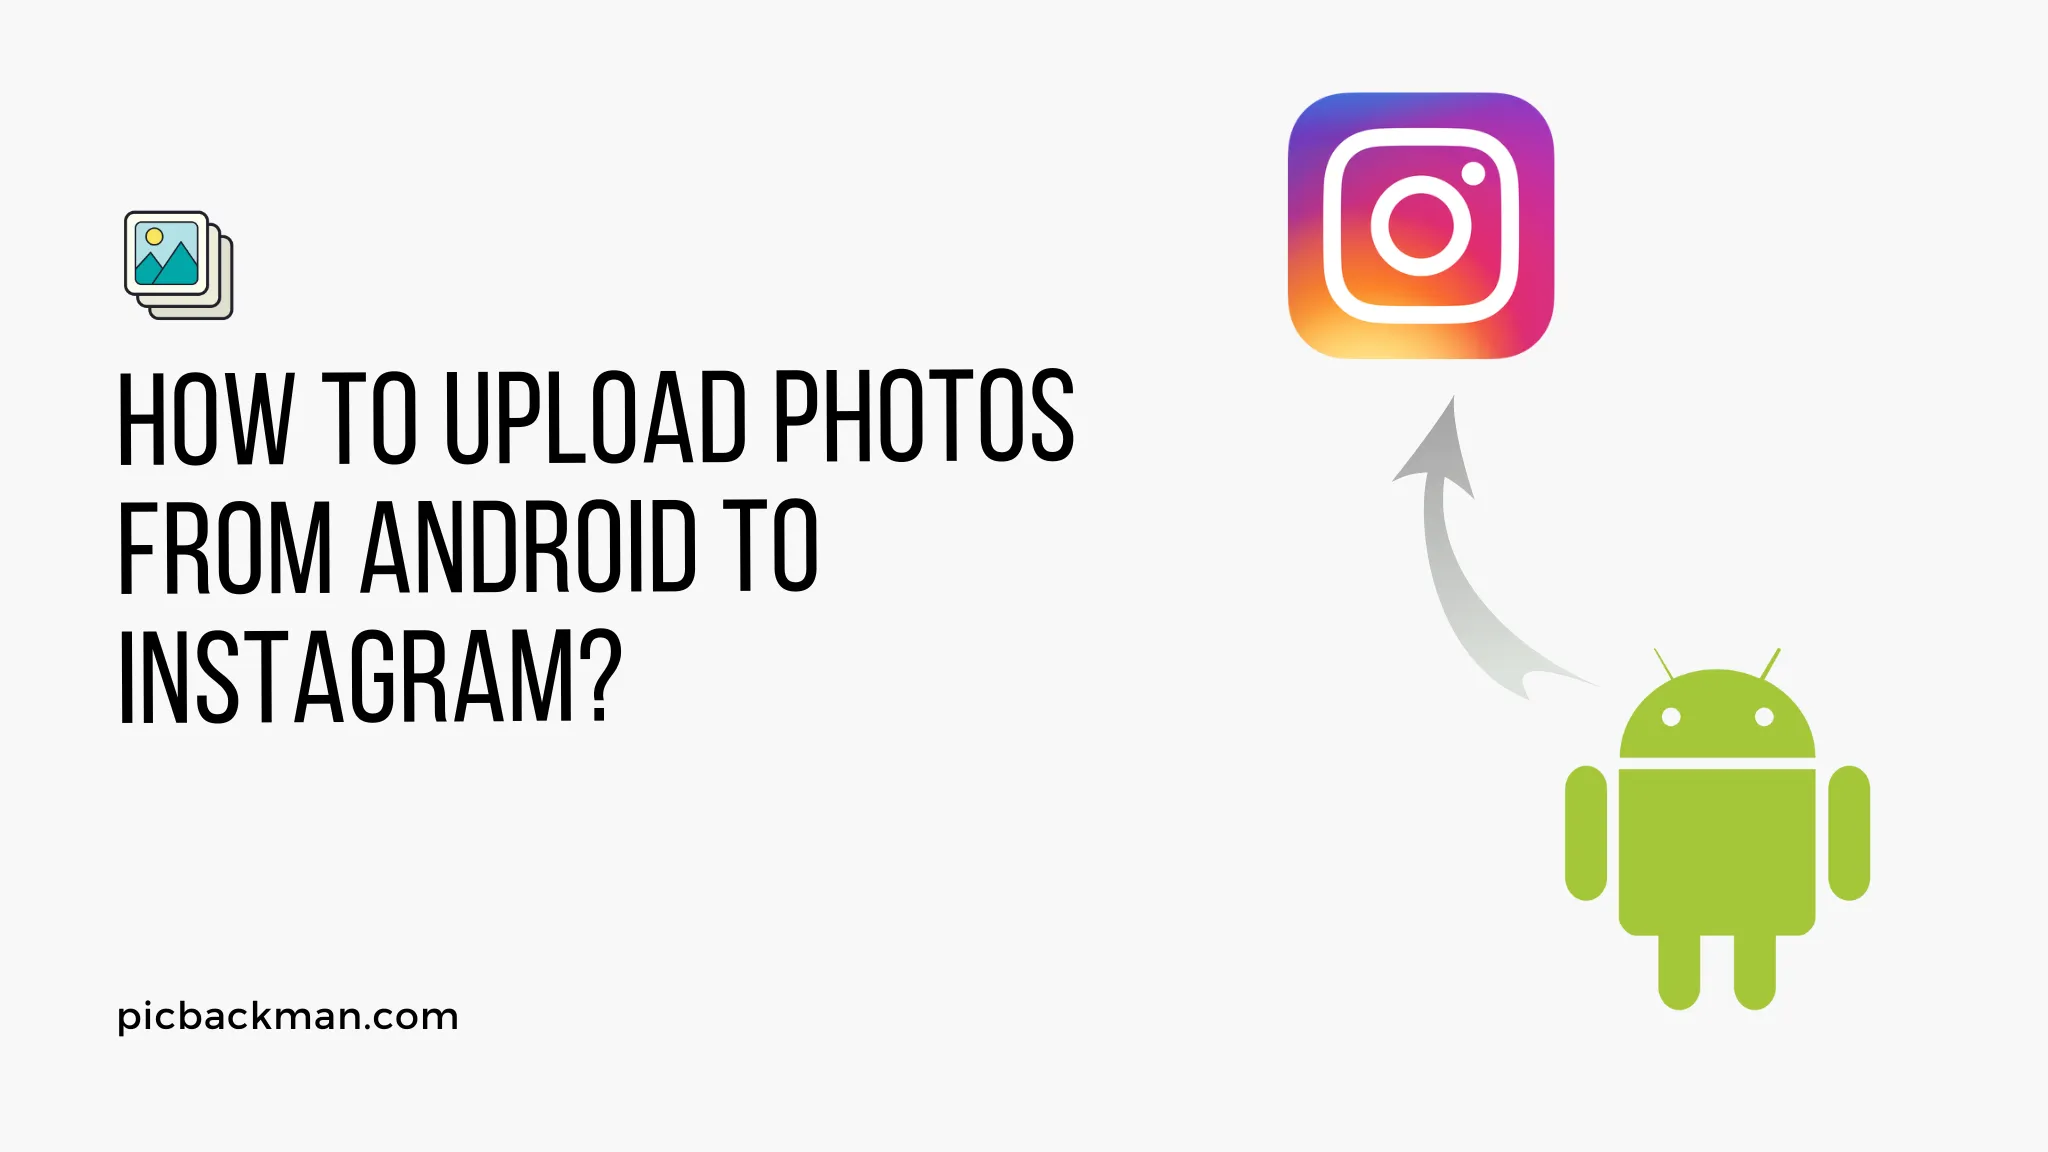 How to Upload Photos from Android to Instagram?